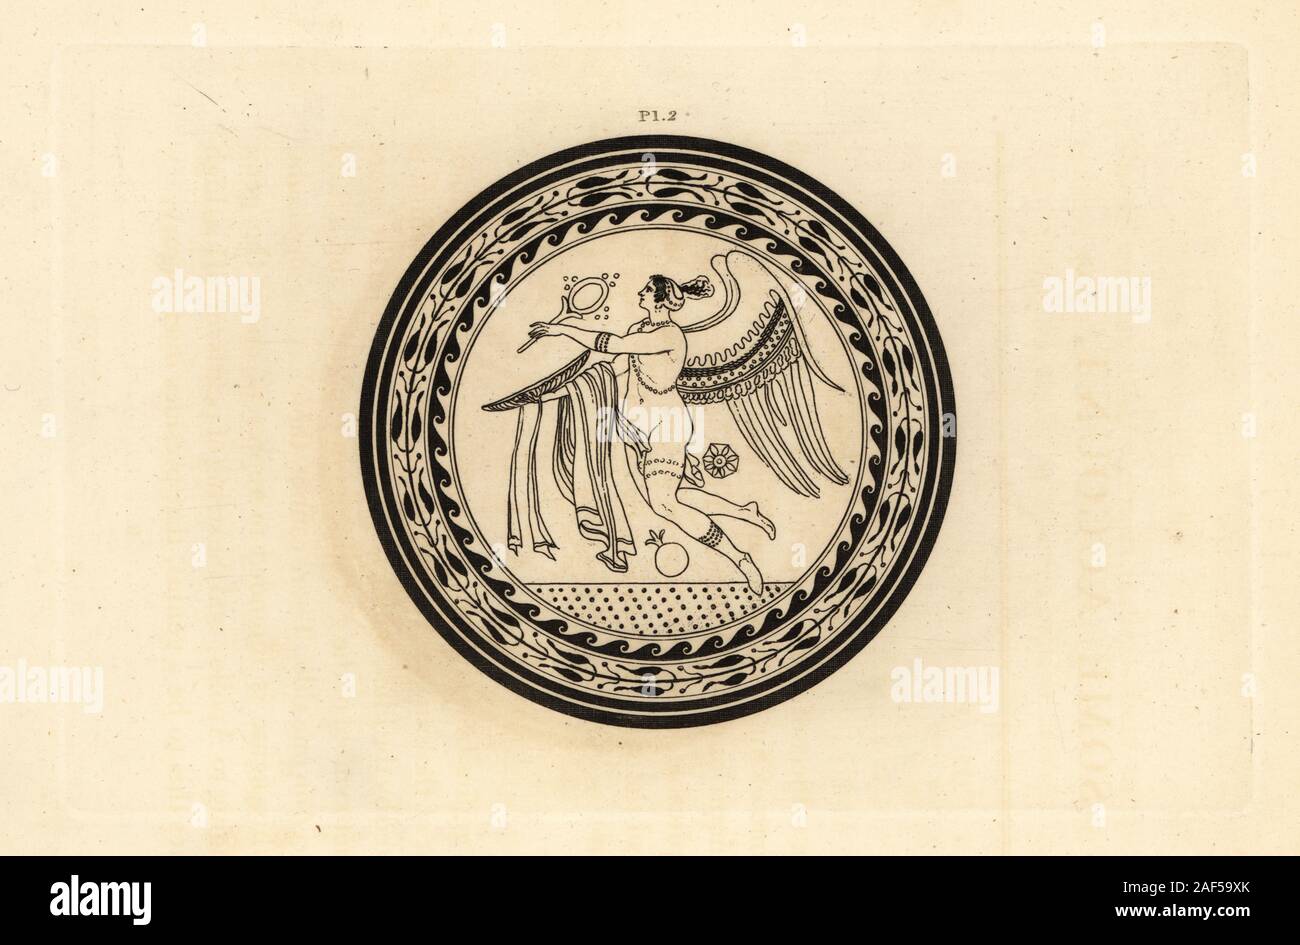 Winged androgynous genius of Apollo who presides over augury with patera, globe and fillet. String of pearls around her thigh. Within a decorative circular border. Copperplate engraving by Thomas Kirk (1765-1797)  from Sir William Hamilton’s Outlines from the Figures and Compositions upon the Greek, Roman and Etruscan Vases of the Late Sir Hamilton, T. M’Lean, London, 1834. Stock Photo